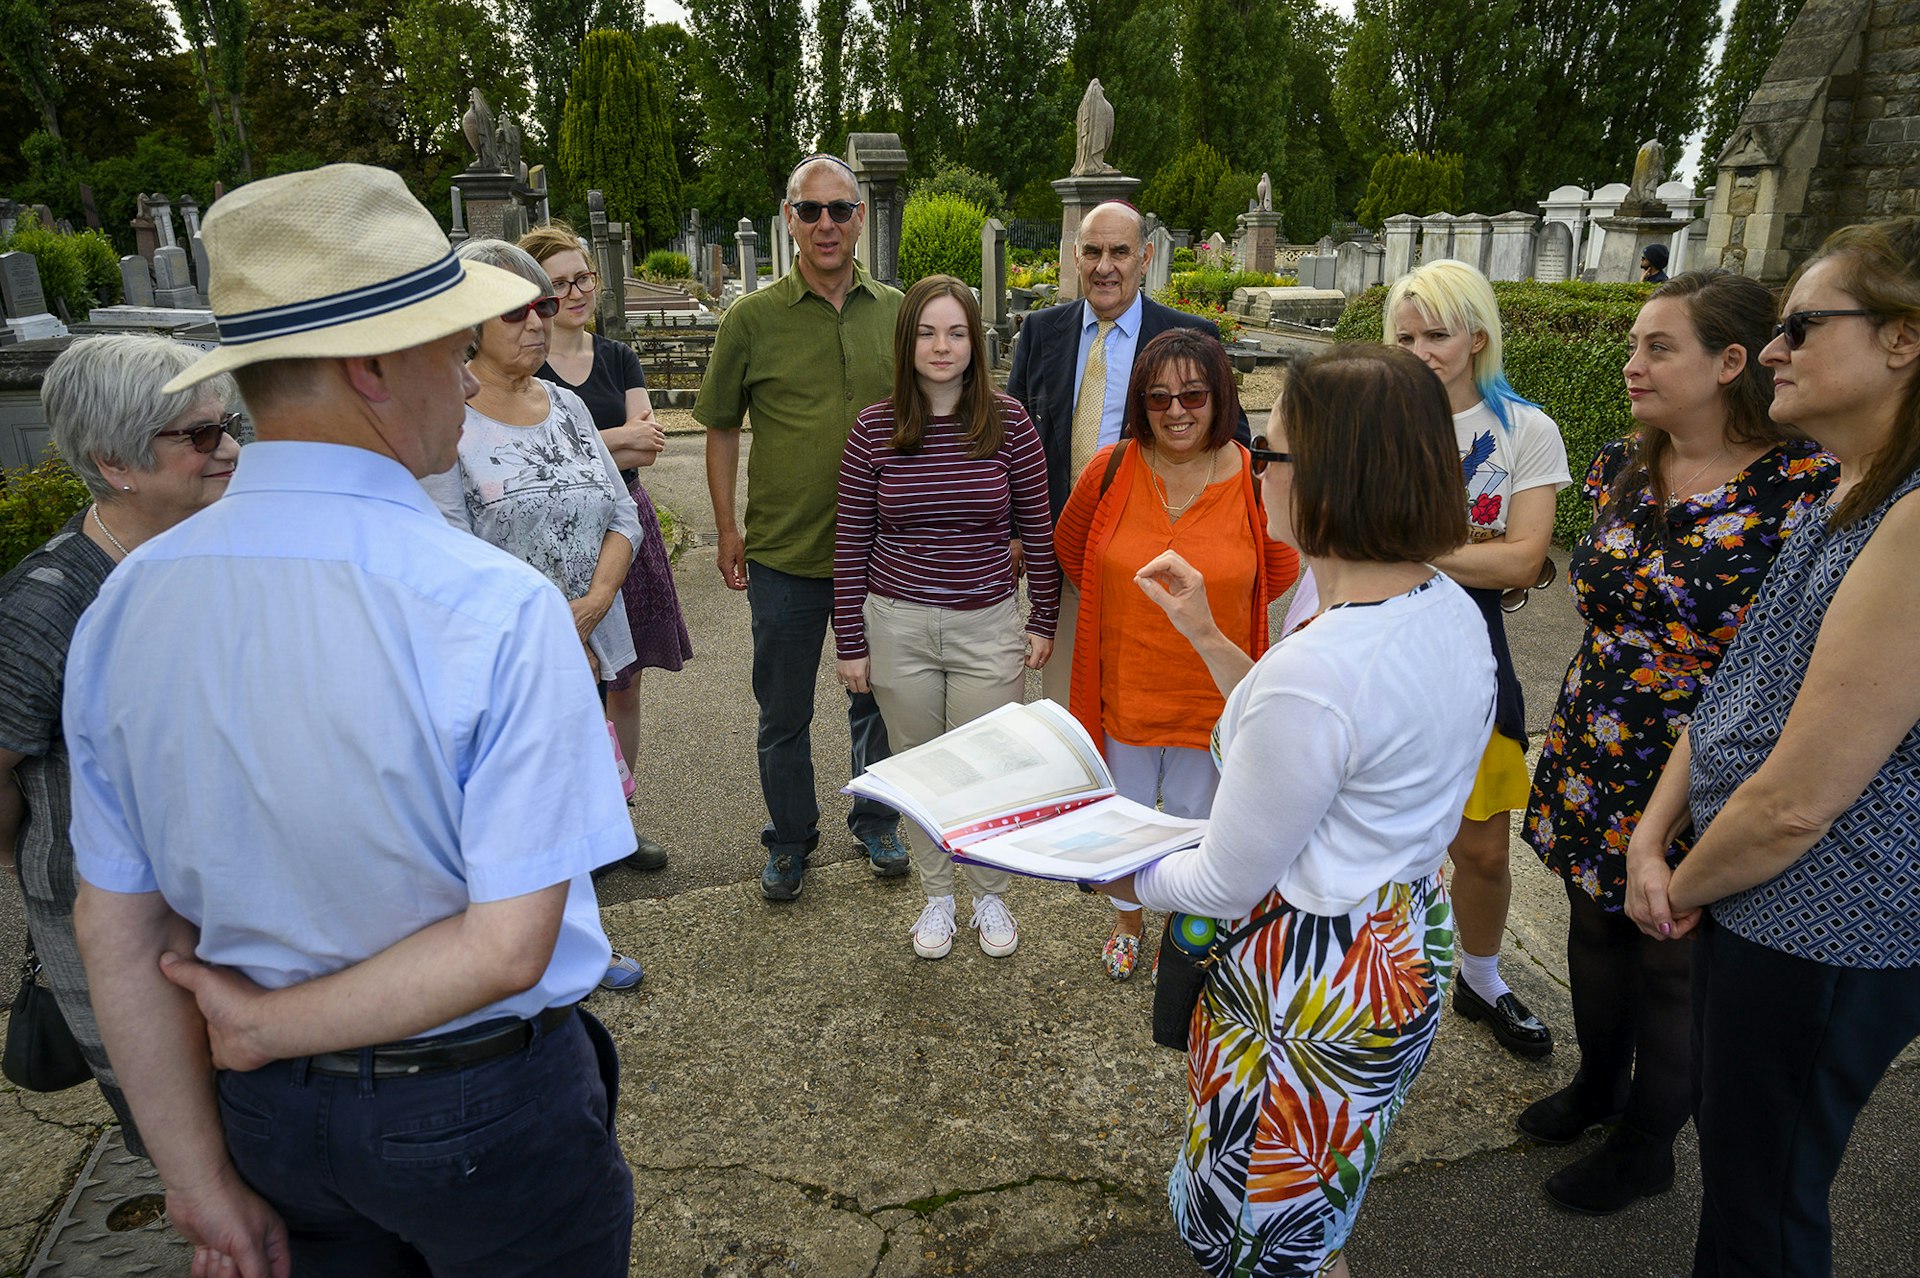 Public tours are now on offer at Willesden Jewish Cemetery